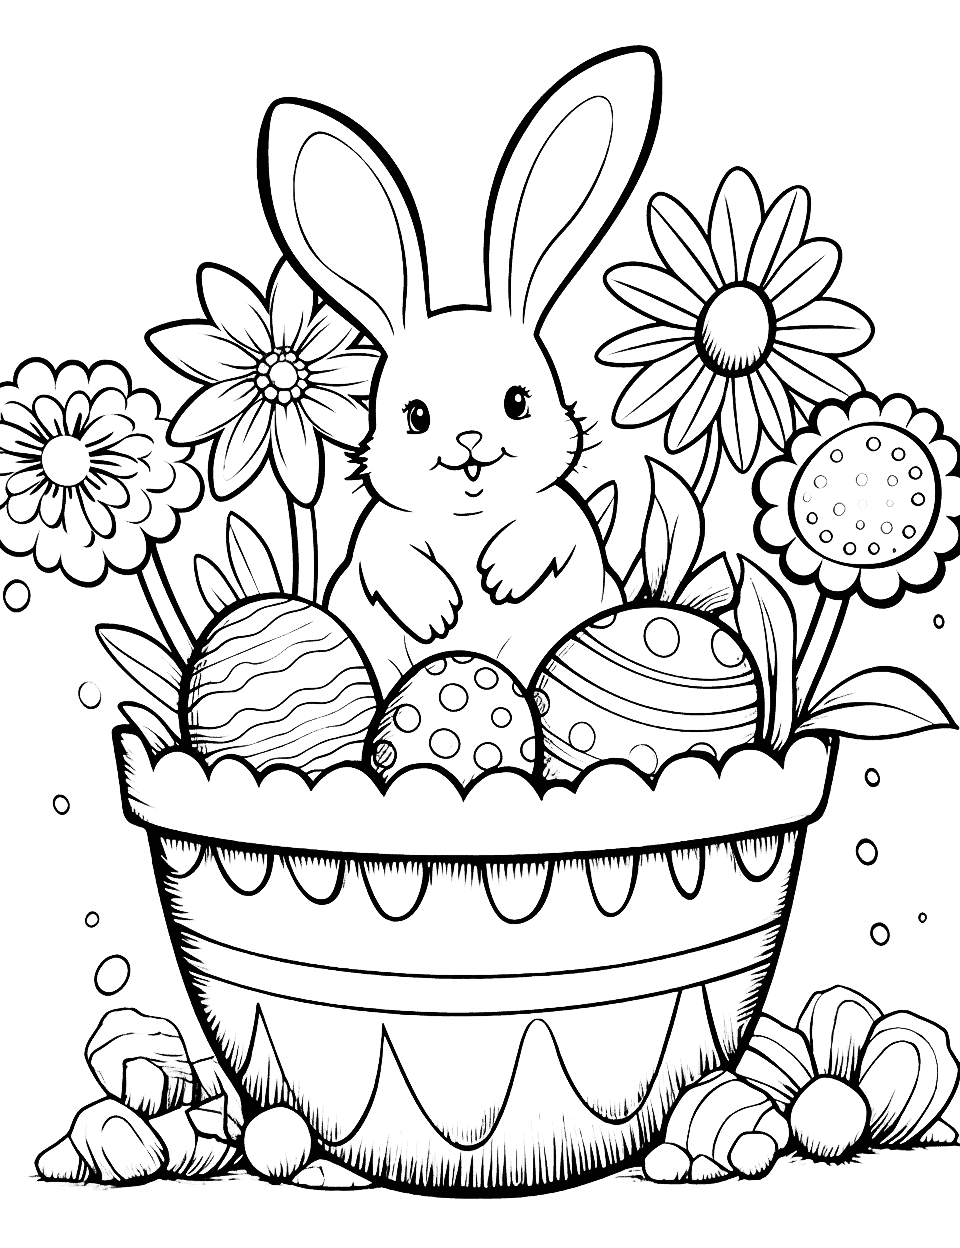 Basket of Happiness Easter Coloring Page - A basket overflowing with Easter eggs, flowers, and butterflies, symbolizing joy and renewal.